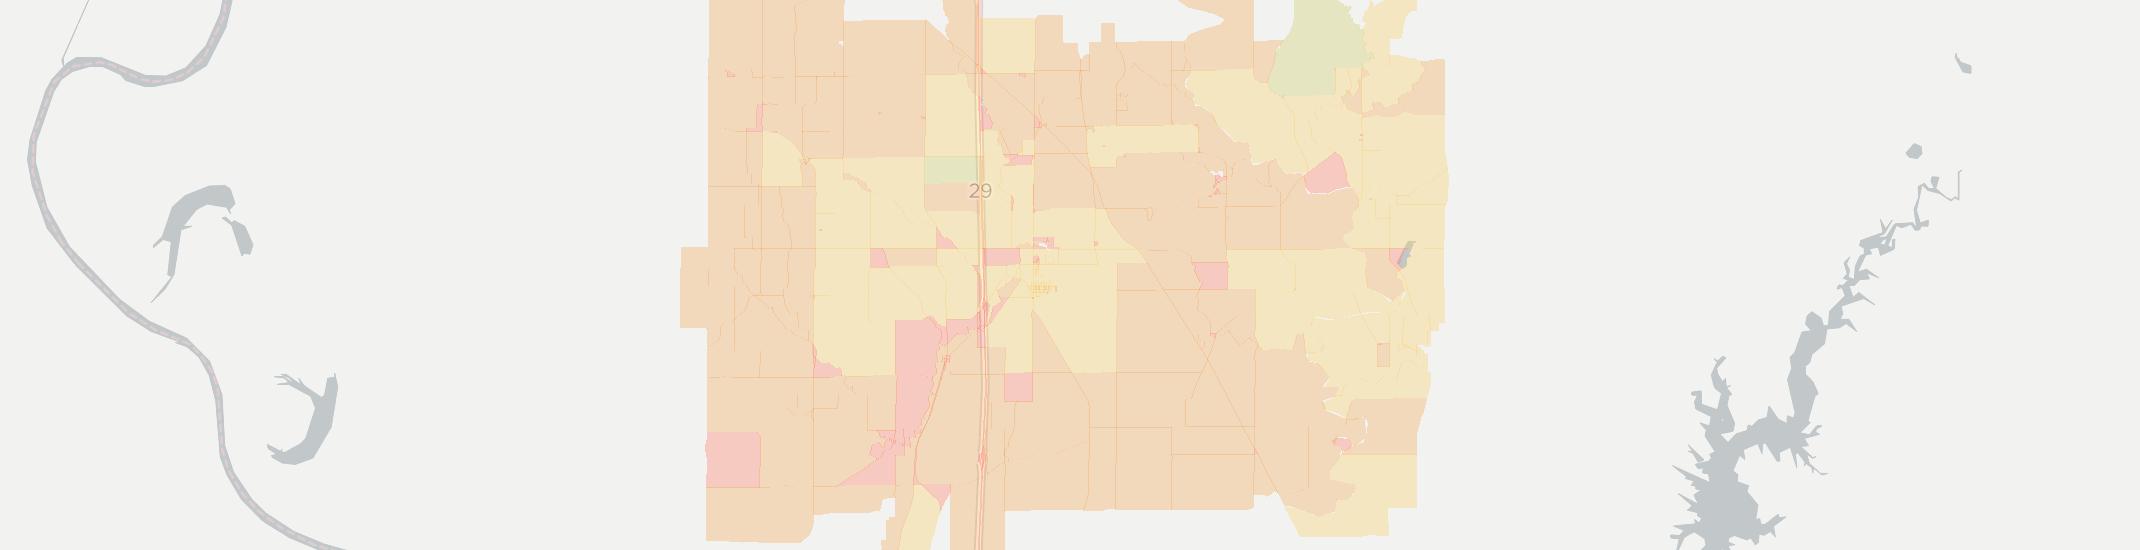 Dearborn Internet Competition Map. Click for interactive map.